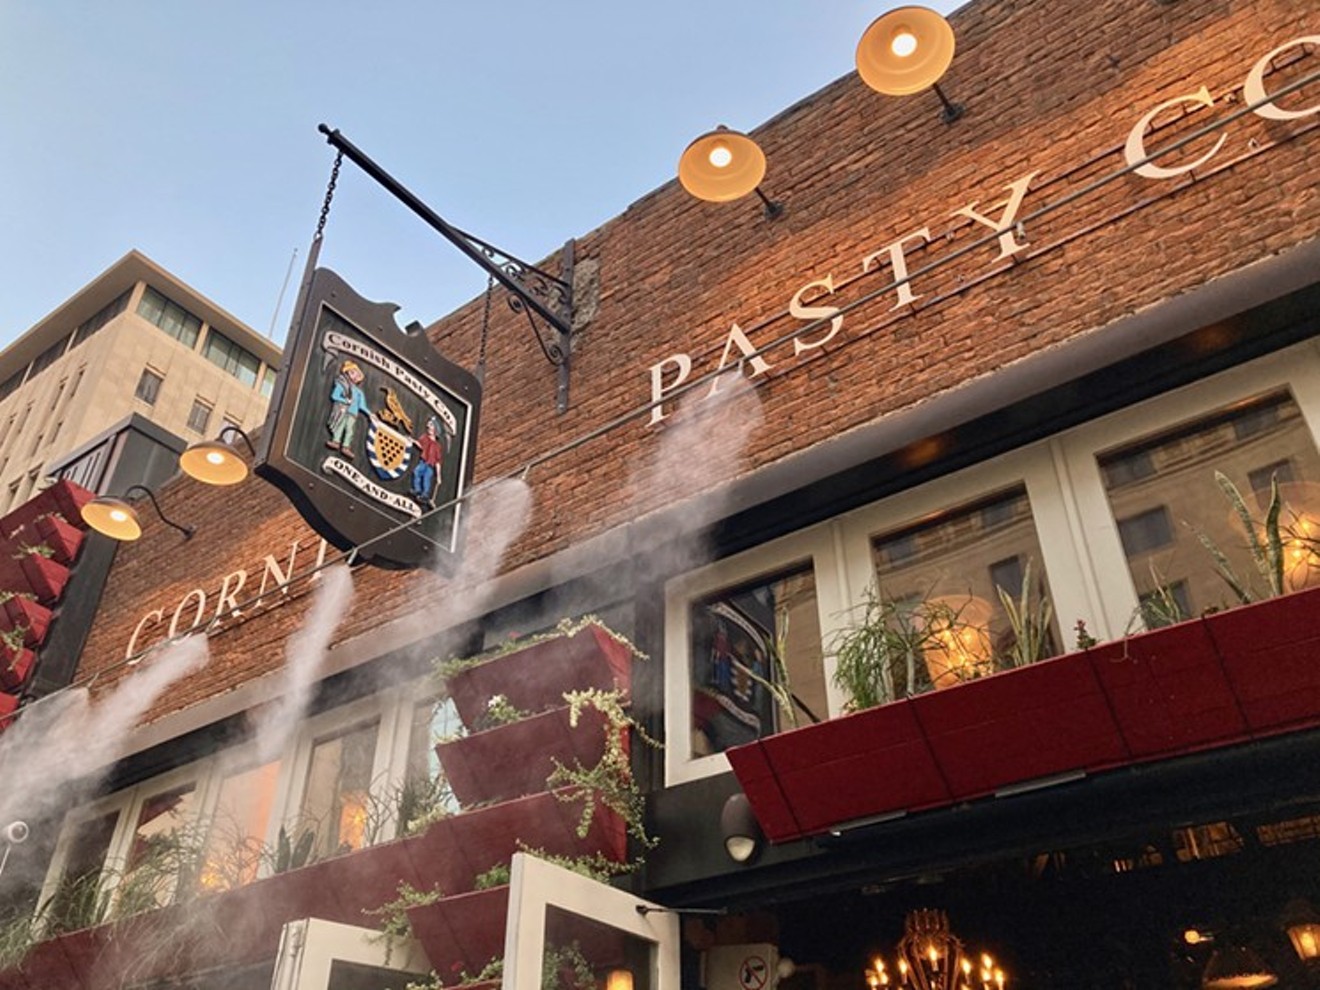 Cornish Pasty's downtown Phoenix location (shown) will soon have another sibling in Glendale. The new West Valley restaurant is set to open in 2024.